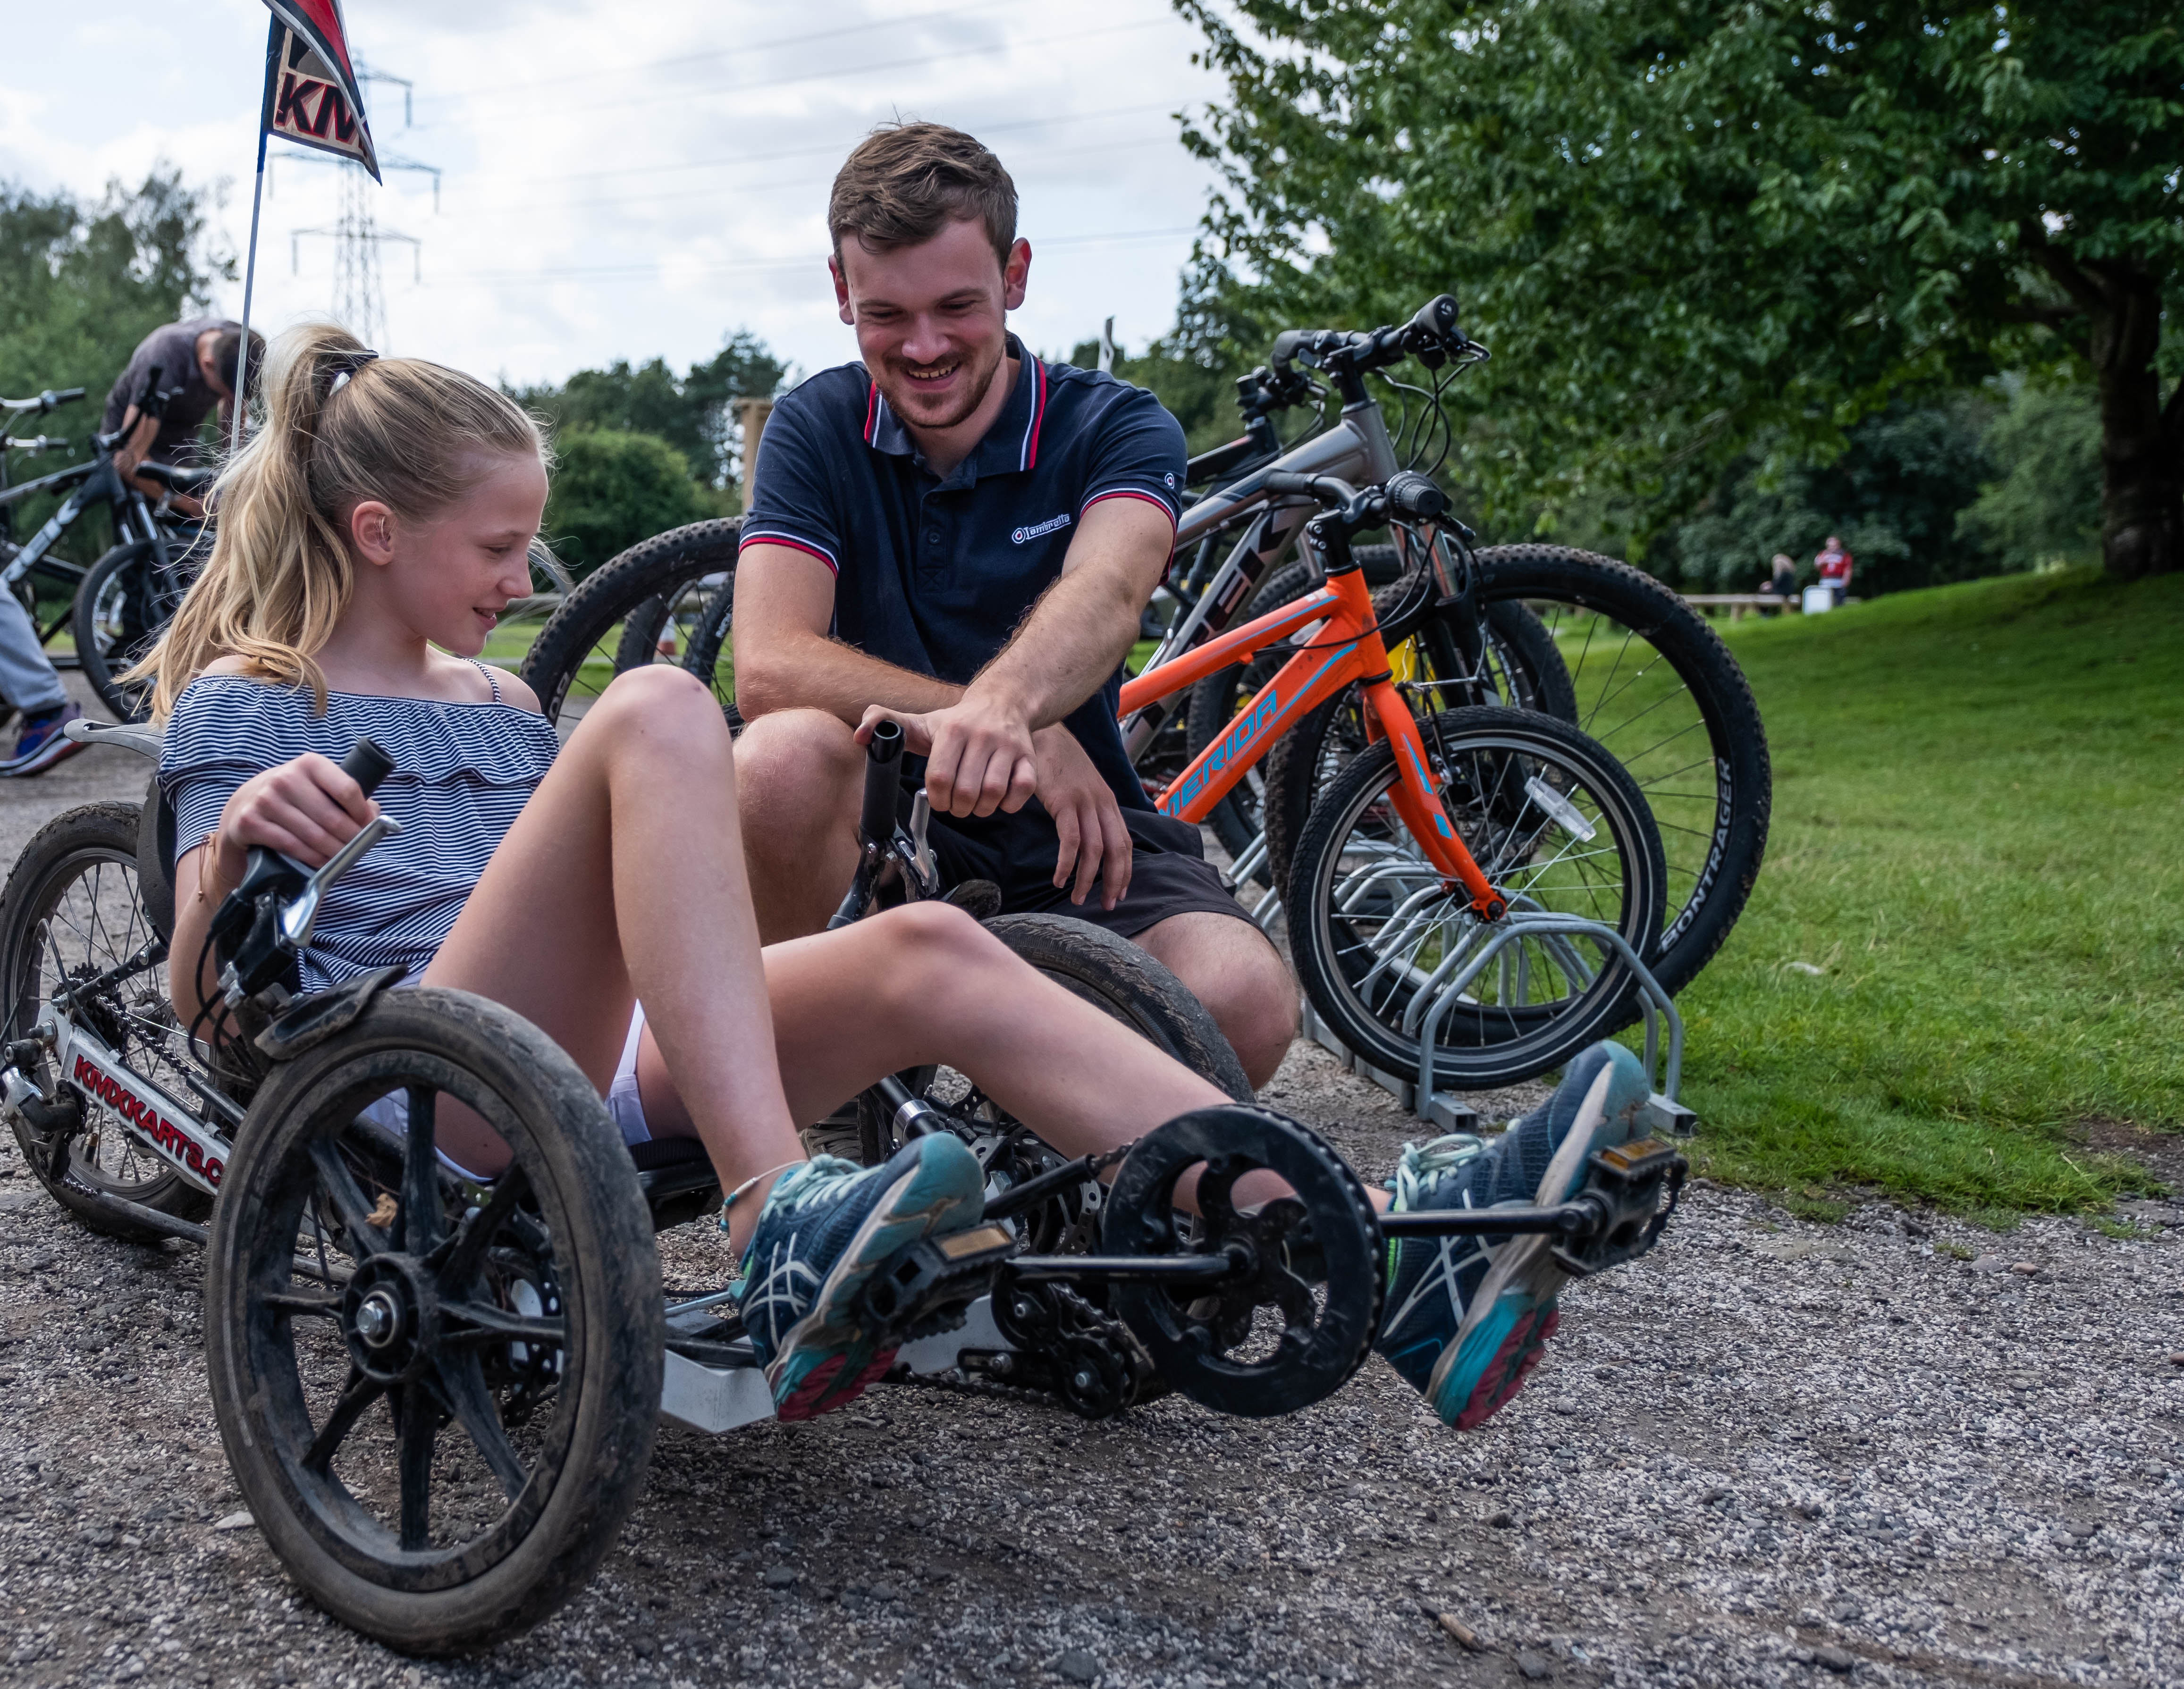 A man shows a girl how to use a KMX Bike at Kingsbury Water Park